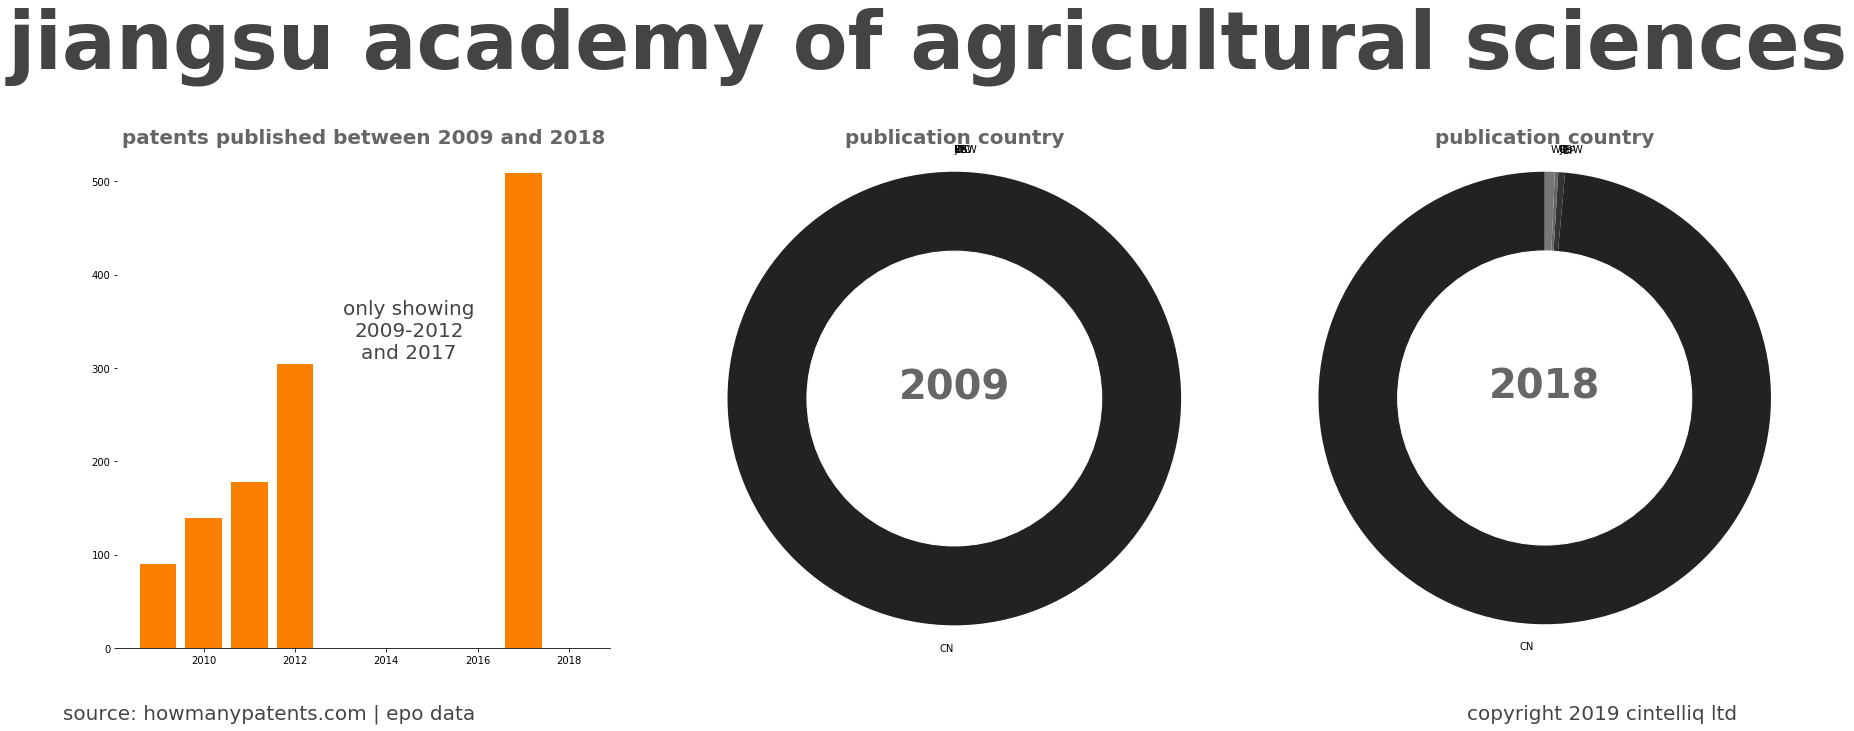 summary of patents for Jiangsu Academy Of Agricultural Sciences